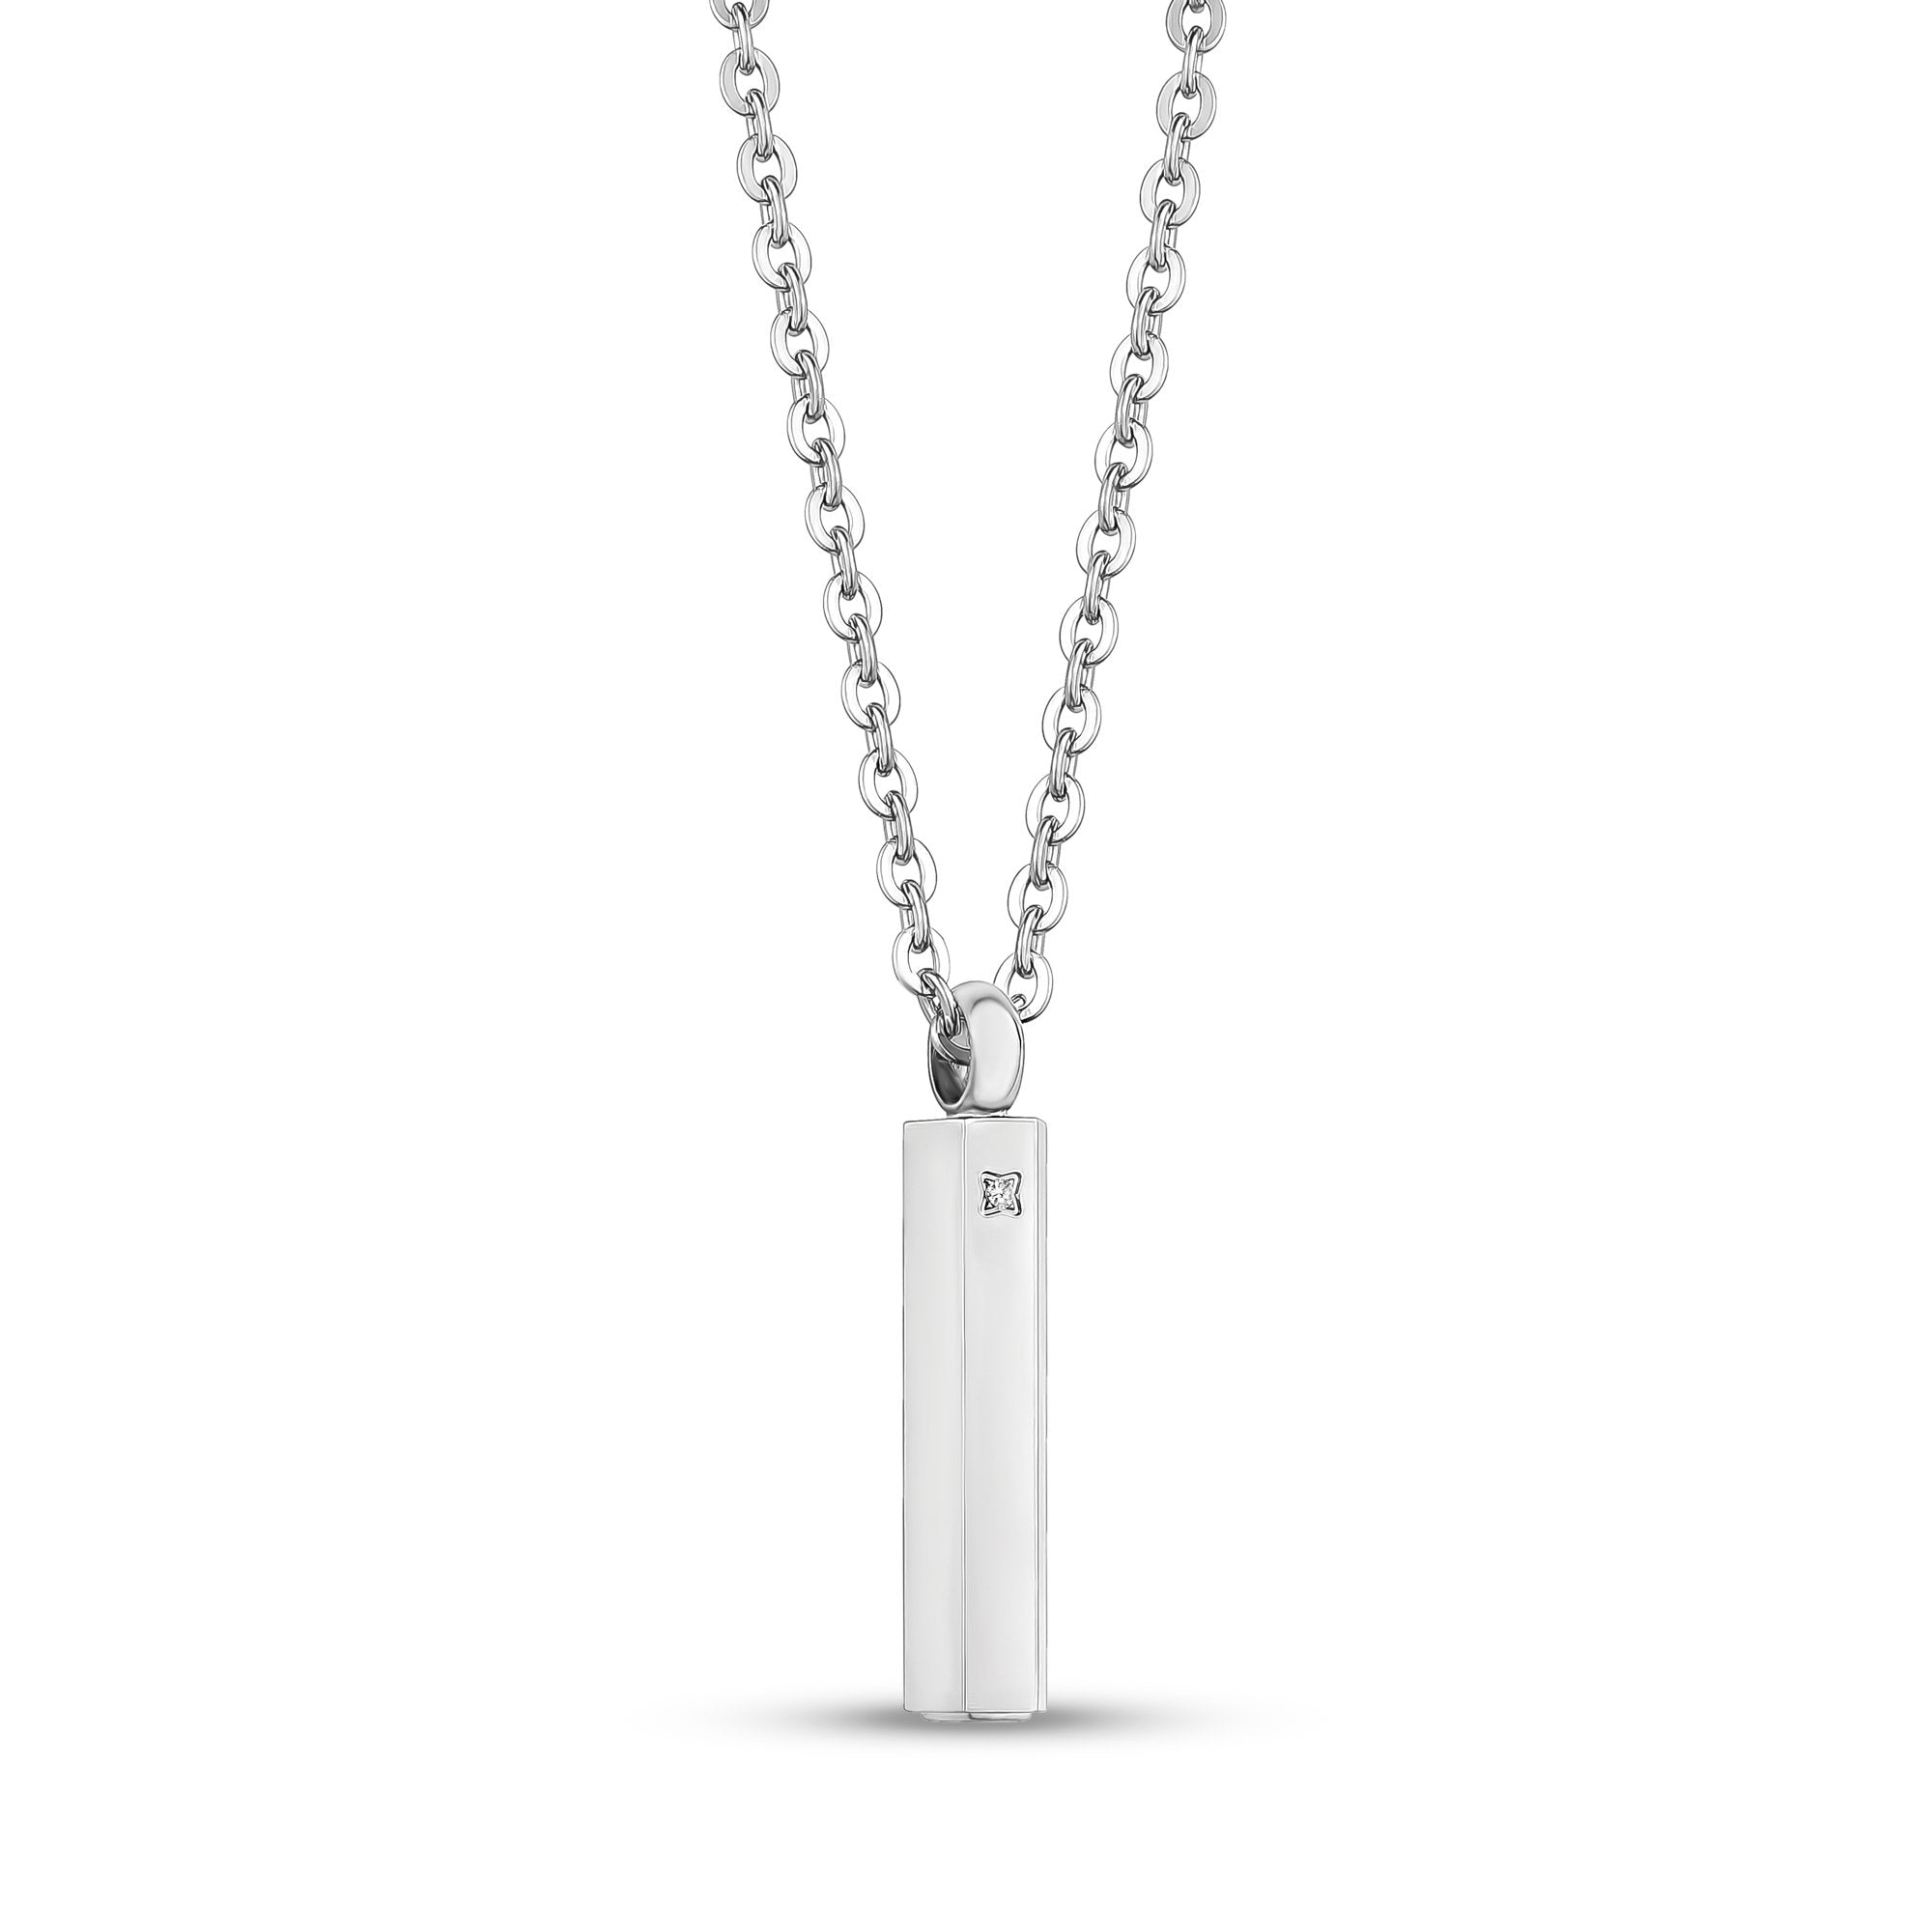 Cremation Urn Jewelry | Titanium Necklace Vial for Ashes